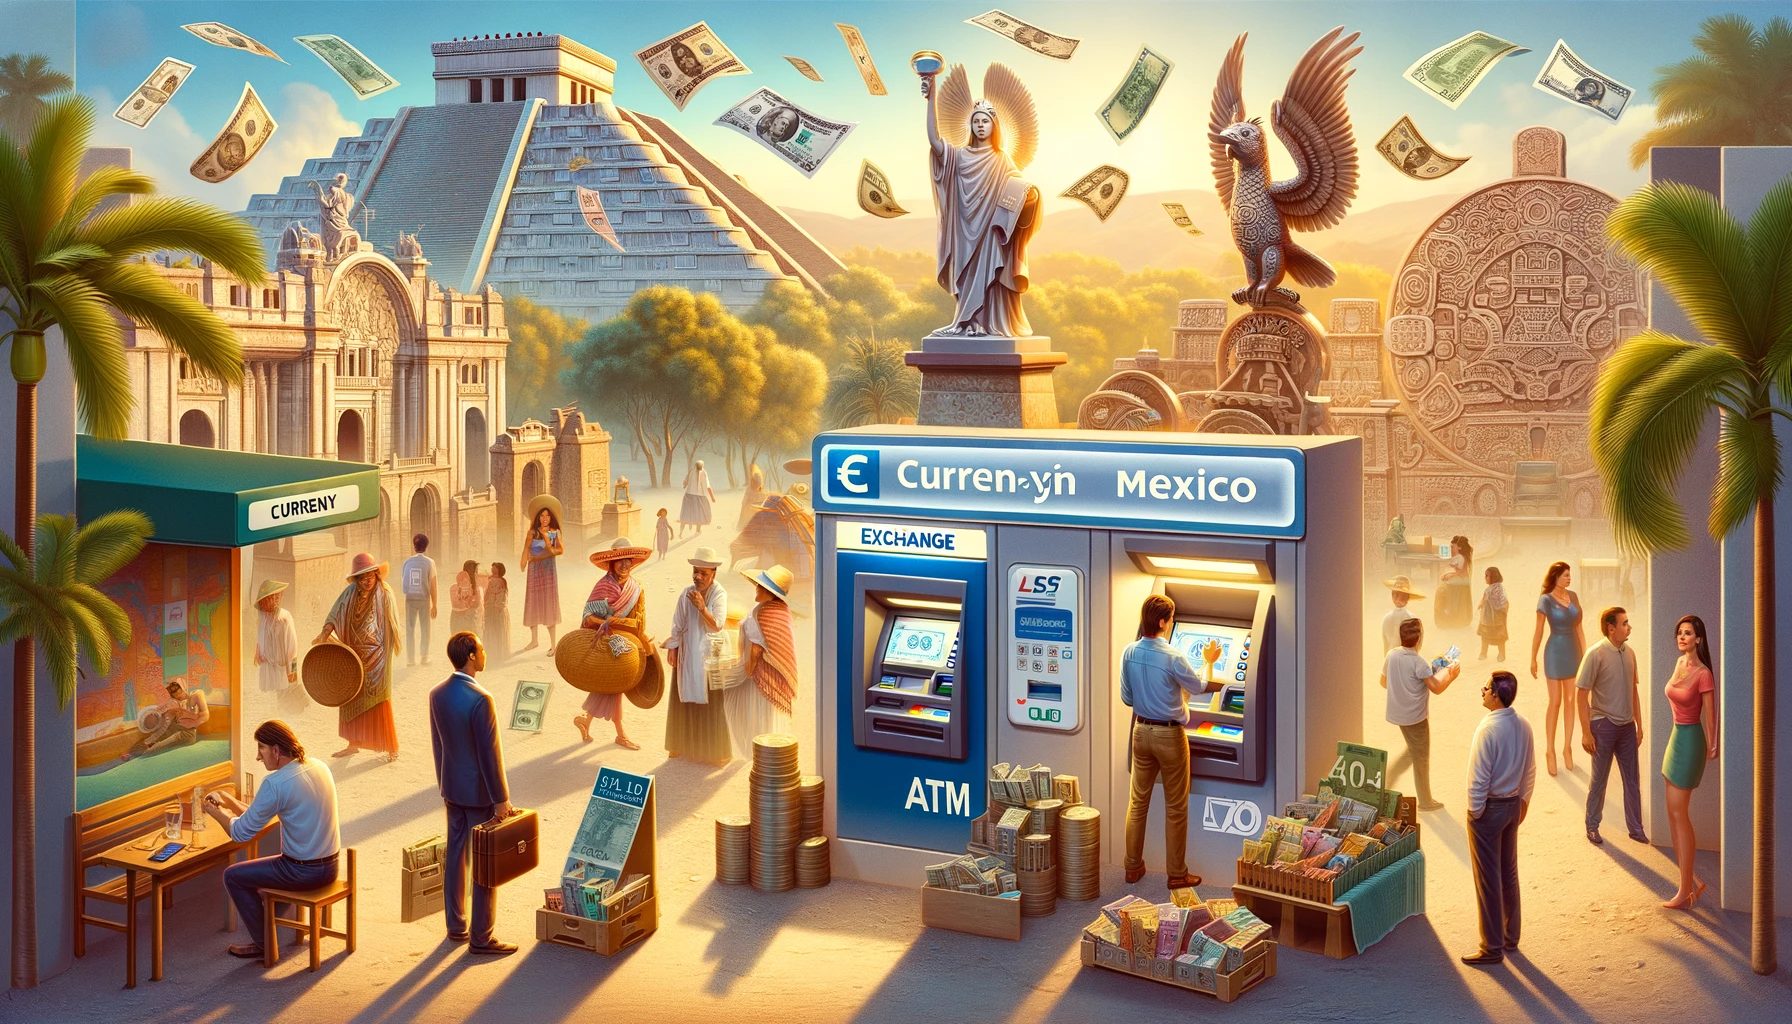 hyper realistic illustration for 'currency in mexico paying, atm, exchanging money'. the image shows various money exchange scenarios in an iconic me